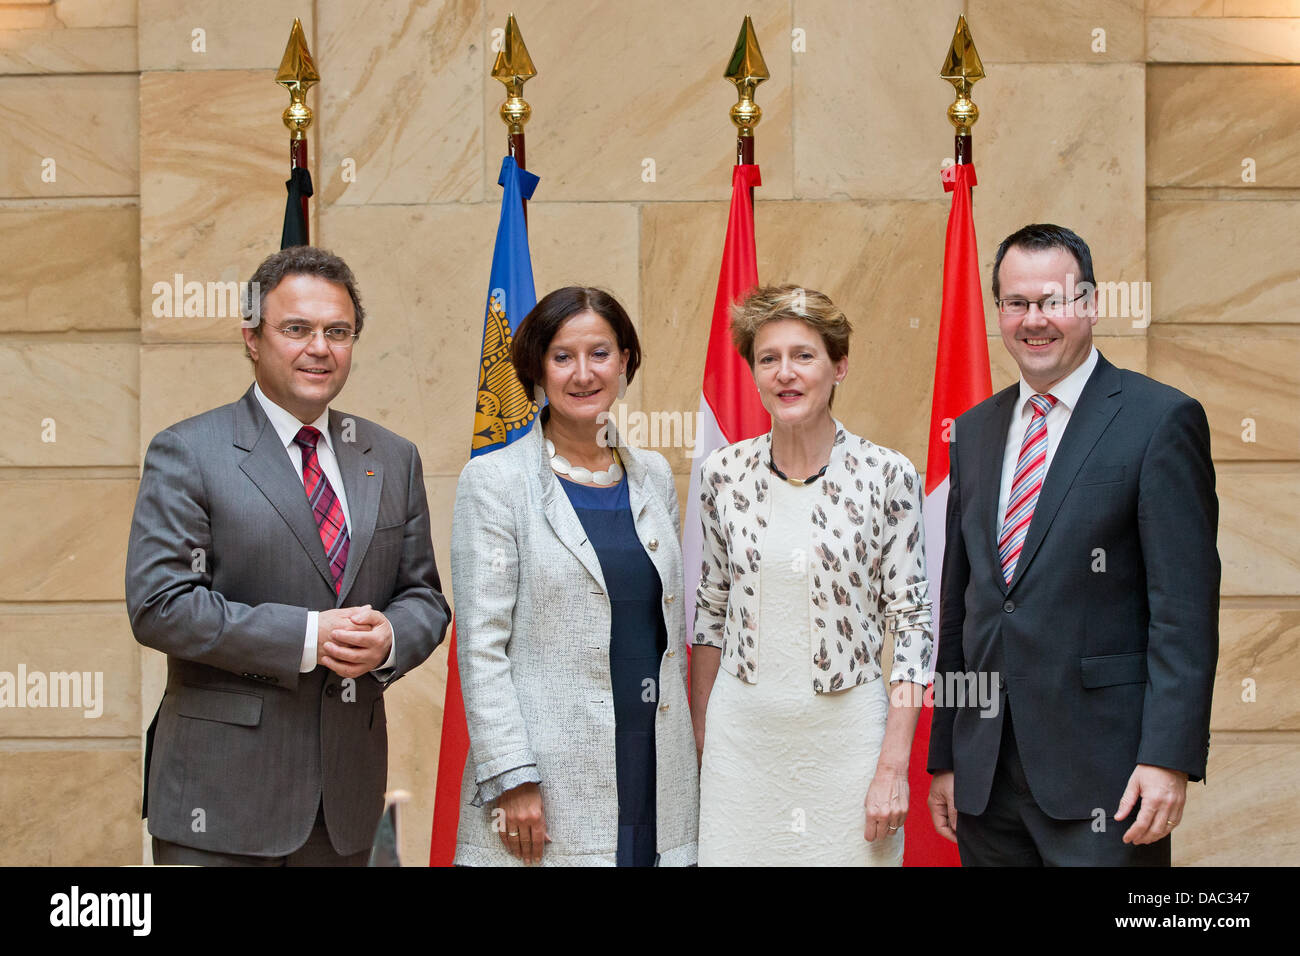 German interior minister Hans-Peter Friedrich (CSU, L-R), Austrian interior minister Johanna Mikl-Leitner (OeVP), Simonetta Sommaruga (SP), head of the Swiss justice and police department (EJPD), and Thomas Zwiefelhofer (VU), minister for interior affairs, justice, and economy of Liechtenstein, stand in front of the national flags at a meeting of interior ministers from German speaking countries in Nuremberg, Germany, 10 July 2013. The ministers want to talk about human trafficking, immigration, and integration as well as the situation of the Syrian refugees at the meeting. Stock Photo